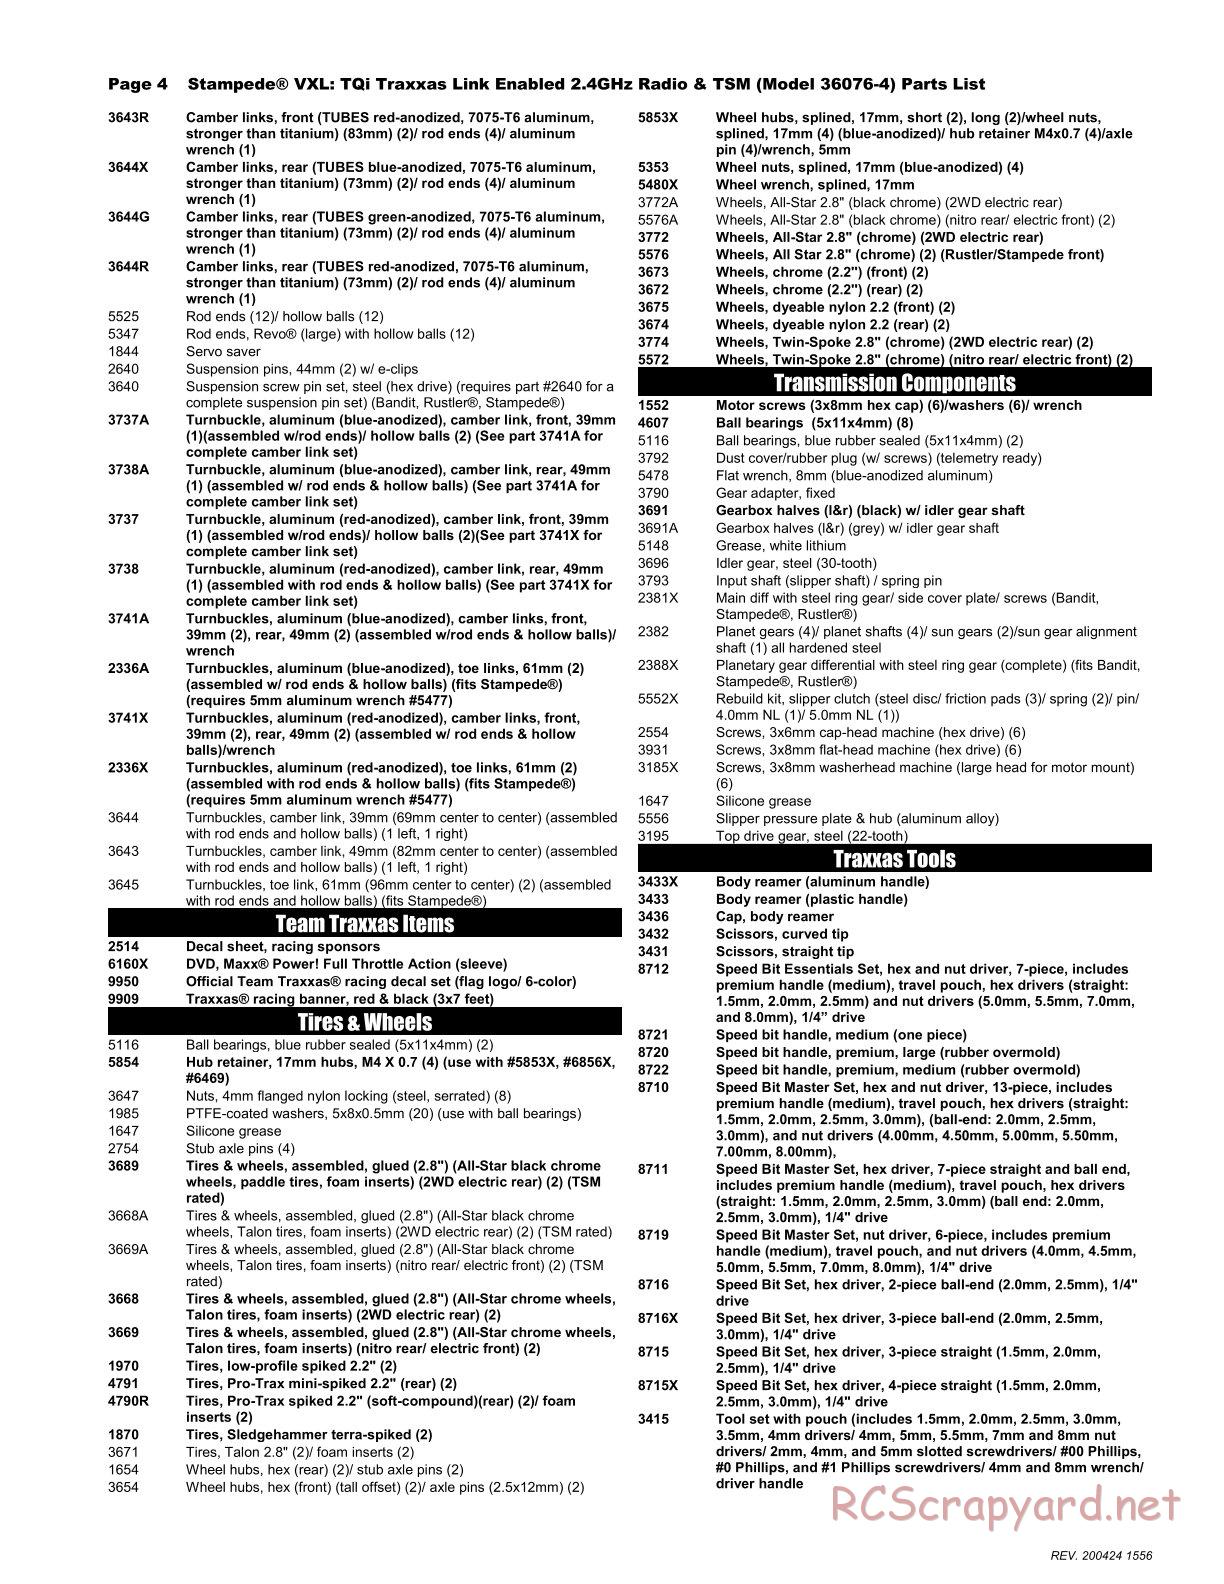 Traxxas - Stampede VXL TSM Rock n' Roll (2017) - Parts List - Page 4